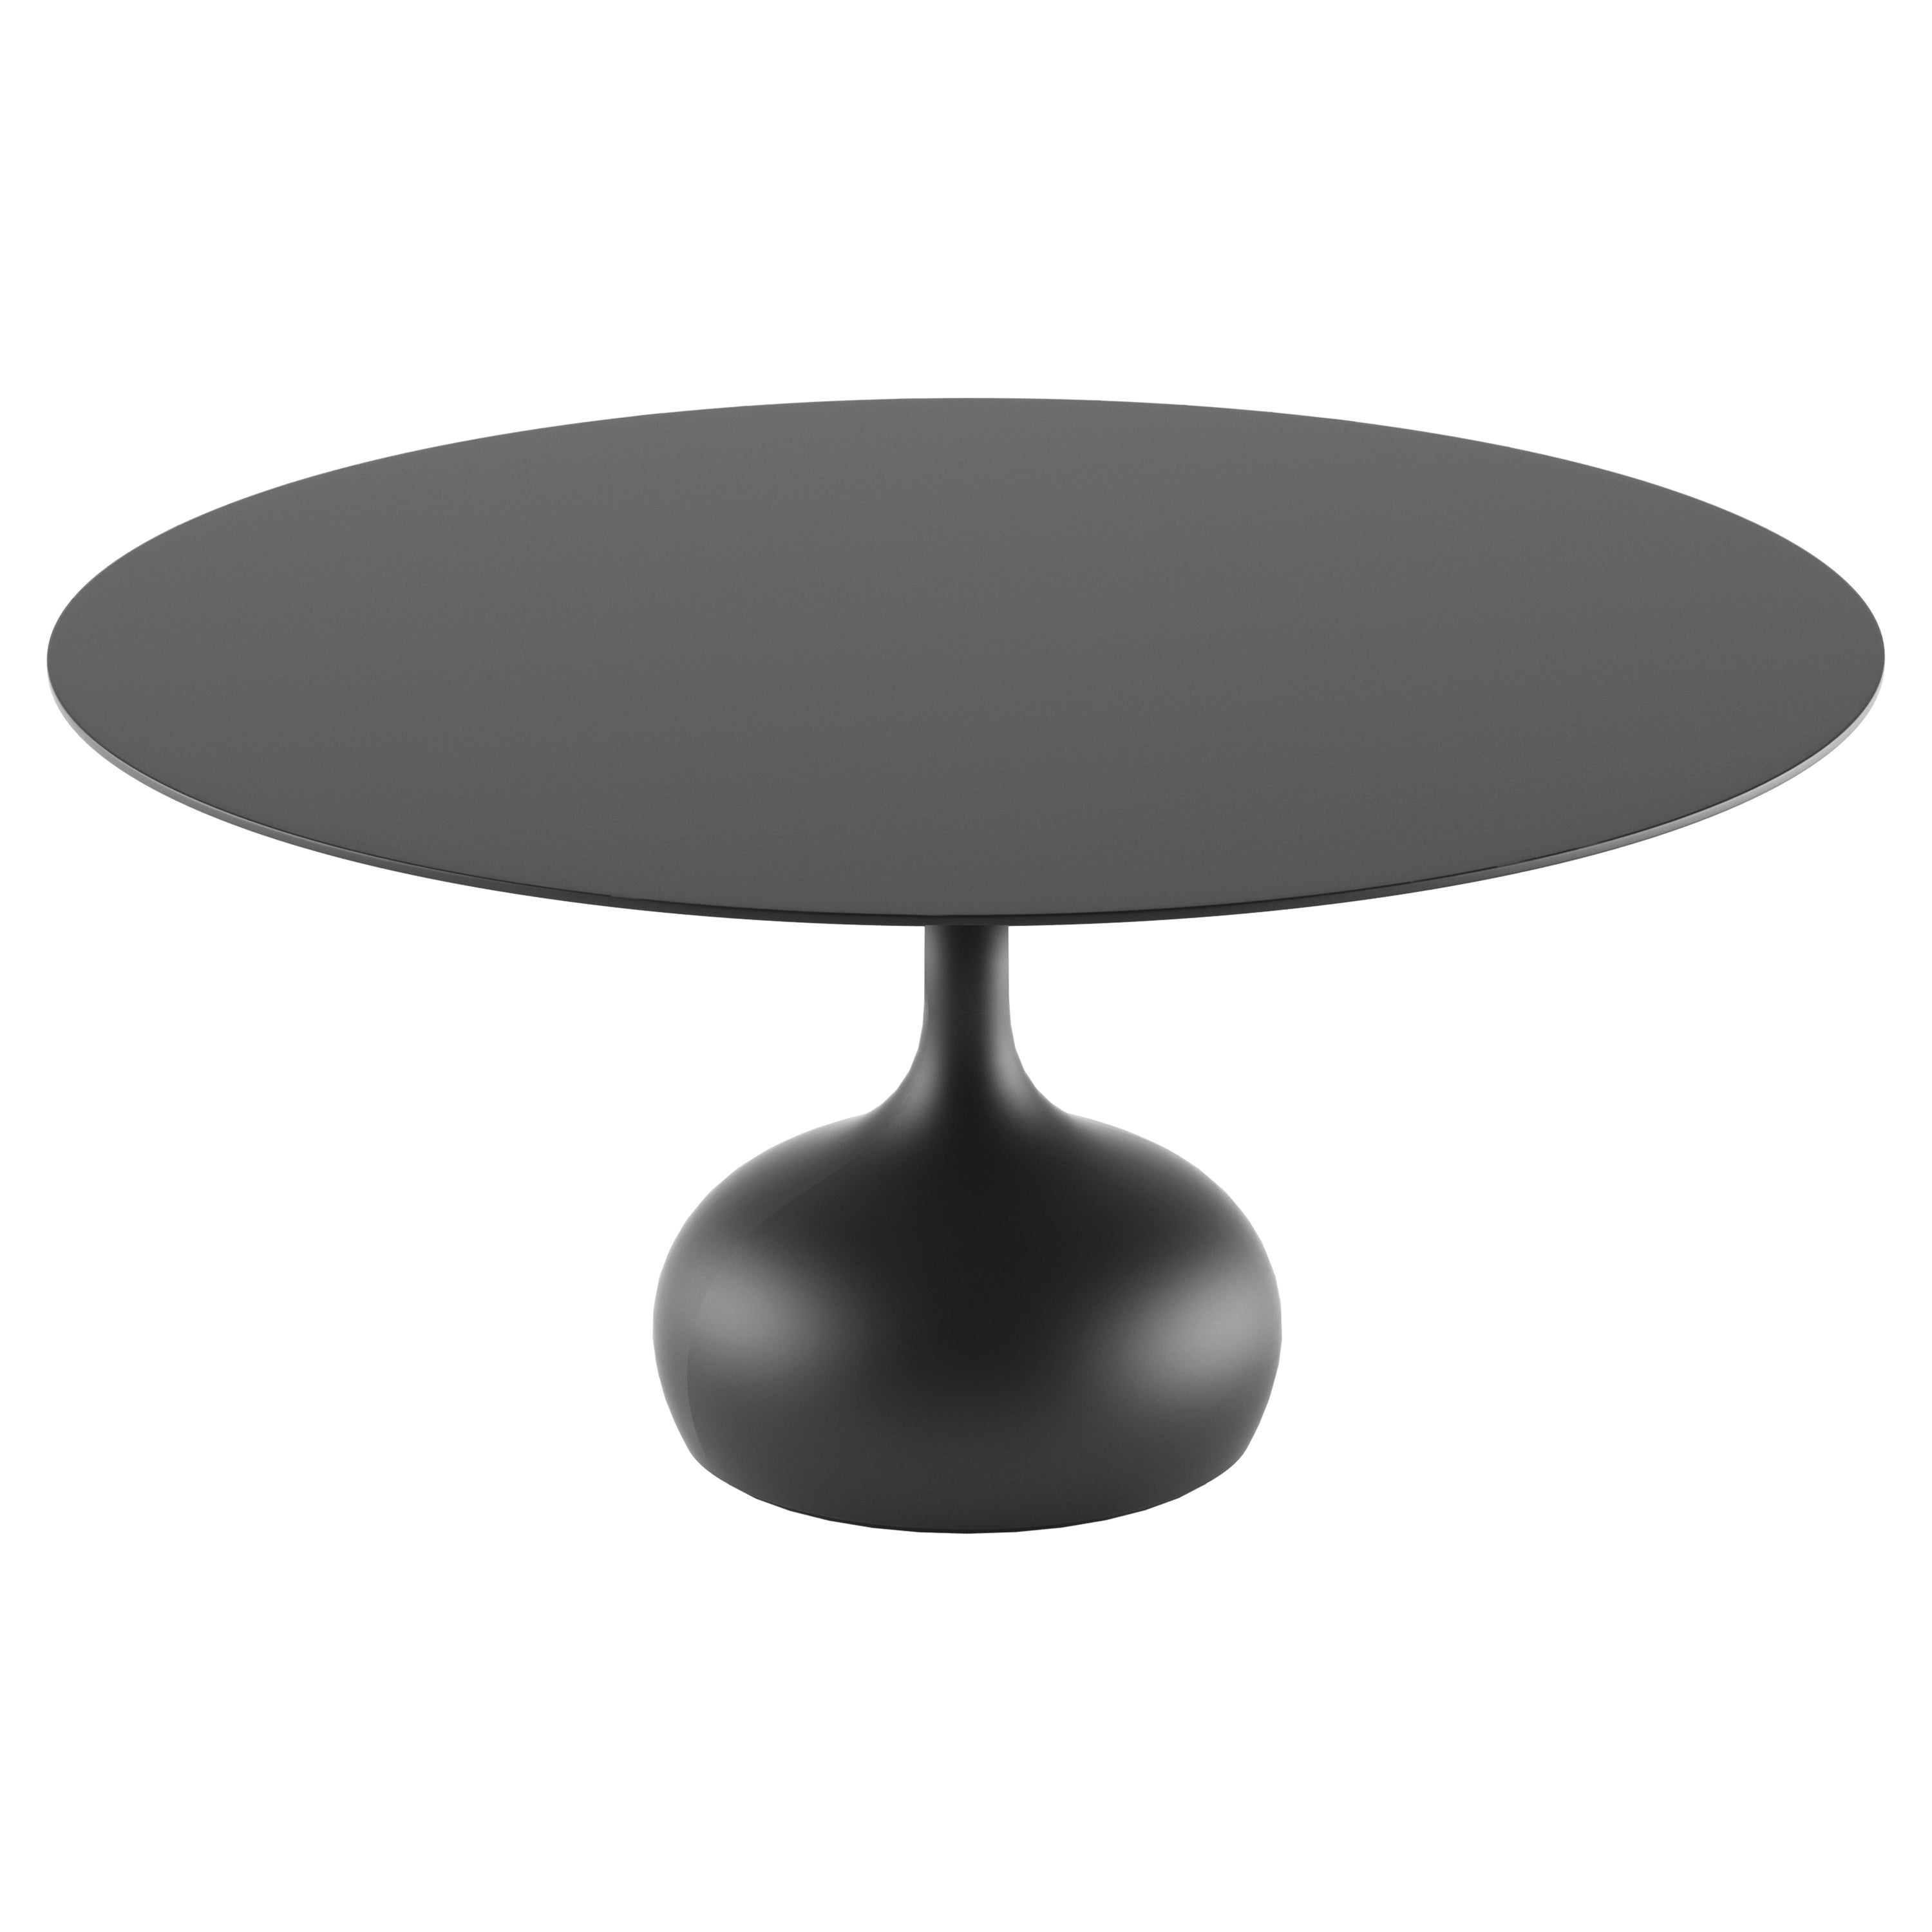 Alias 011 Saen Table Ø160 in Black Lacquered MDF Top by Gabriele e Oscar Buratti For Sale